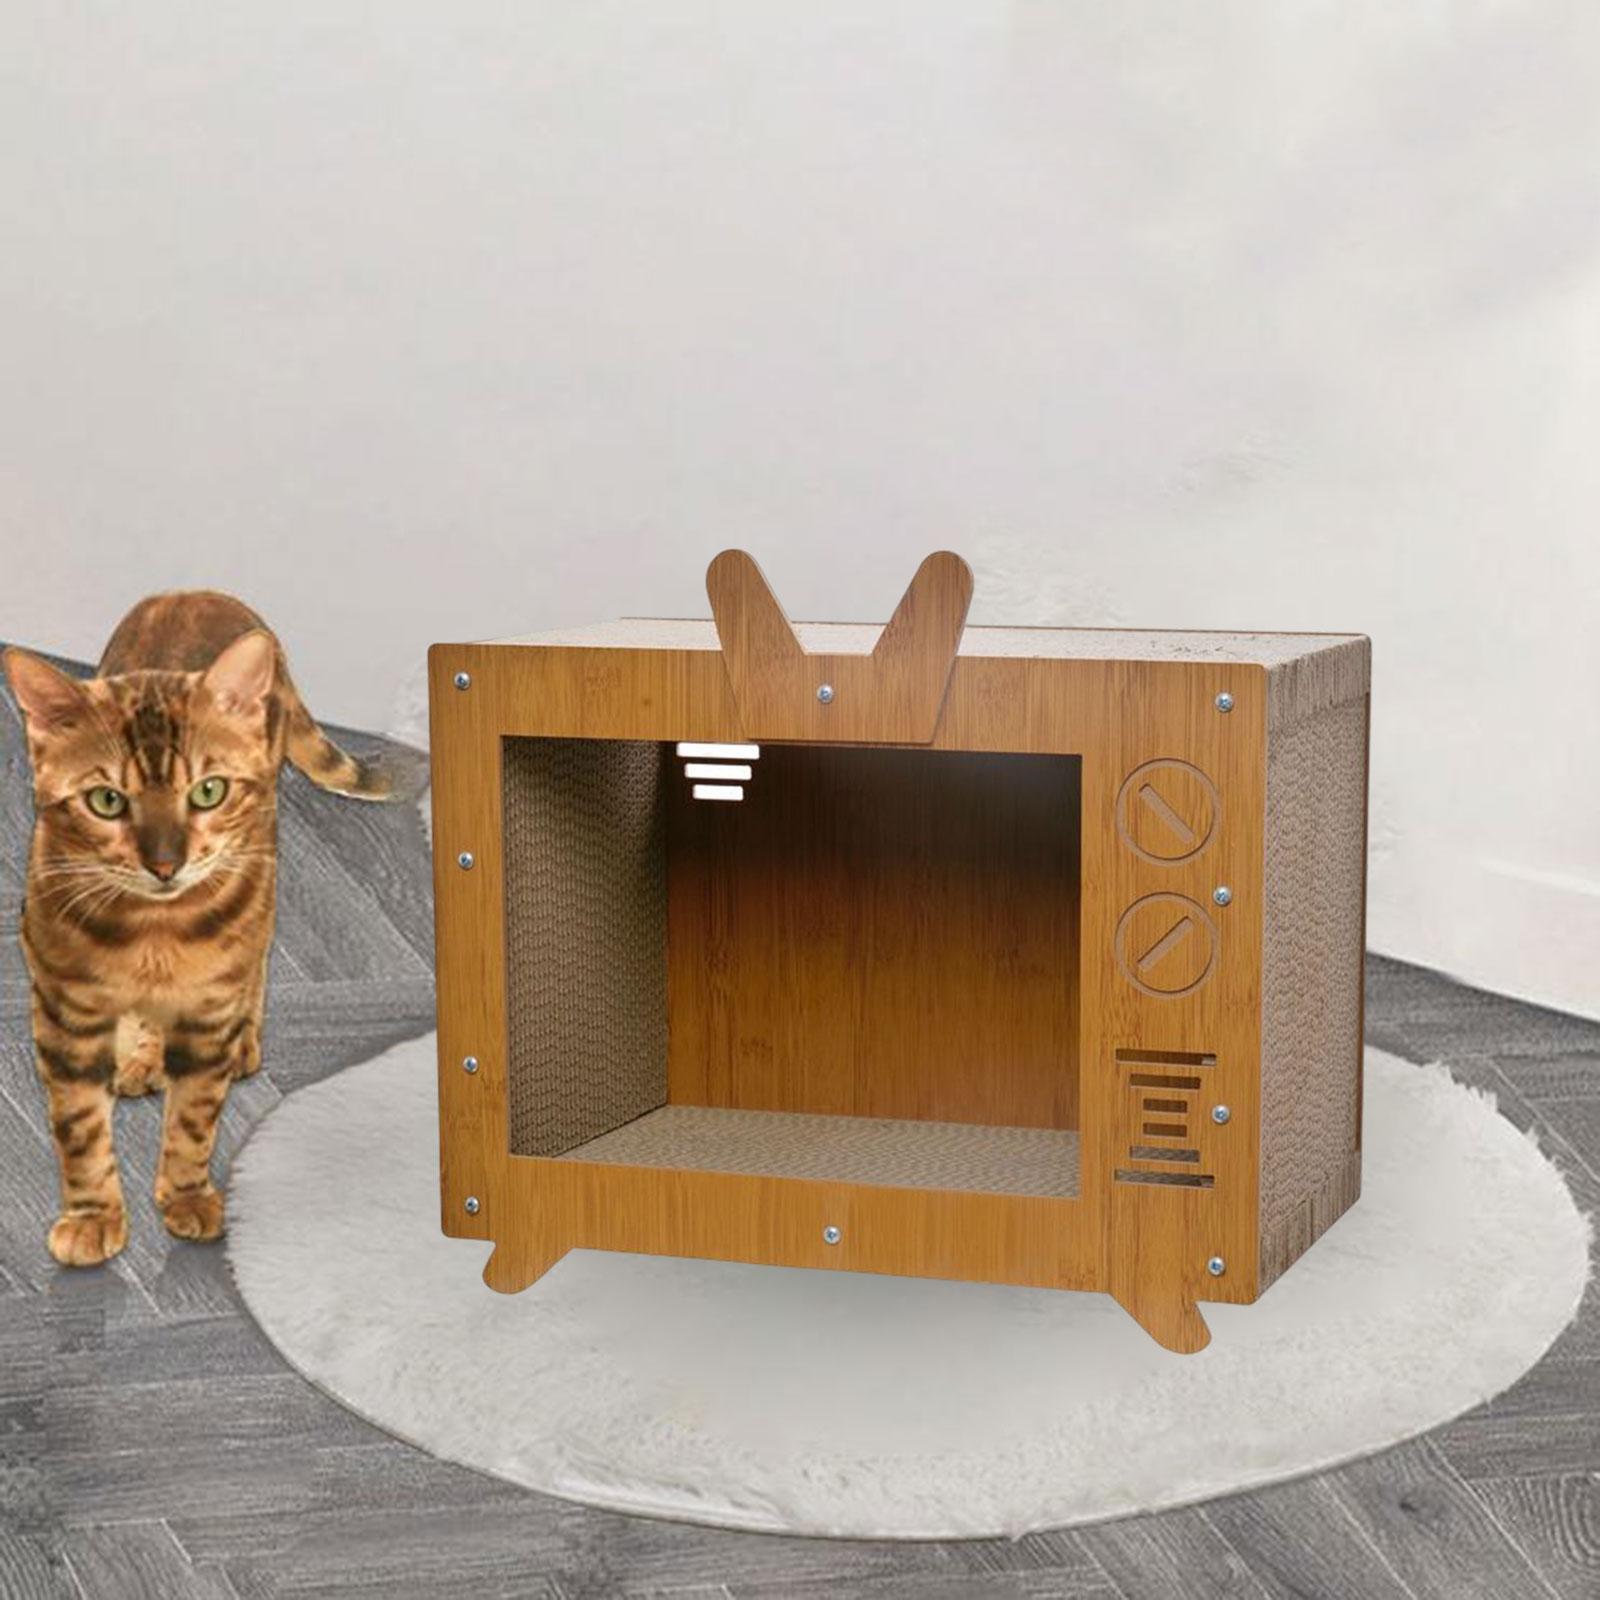 TV Shaped Cat Scratching Widely Used Environmentally Friendly